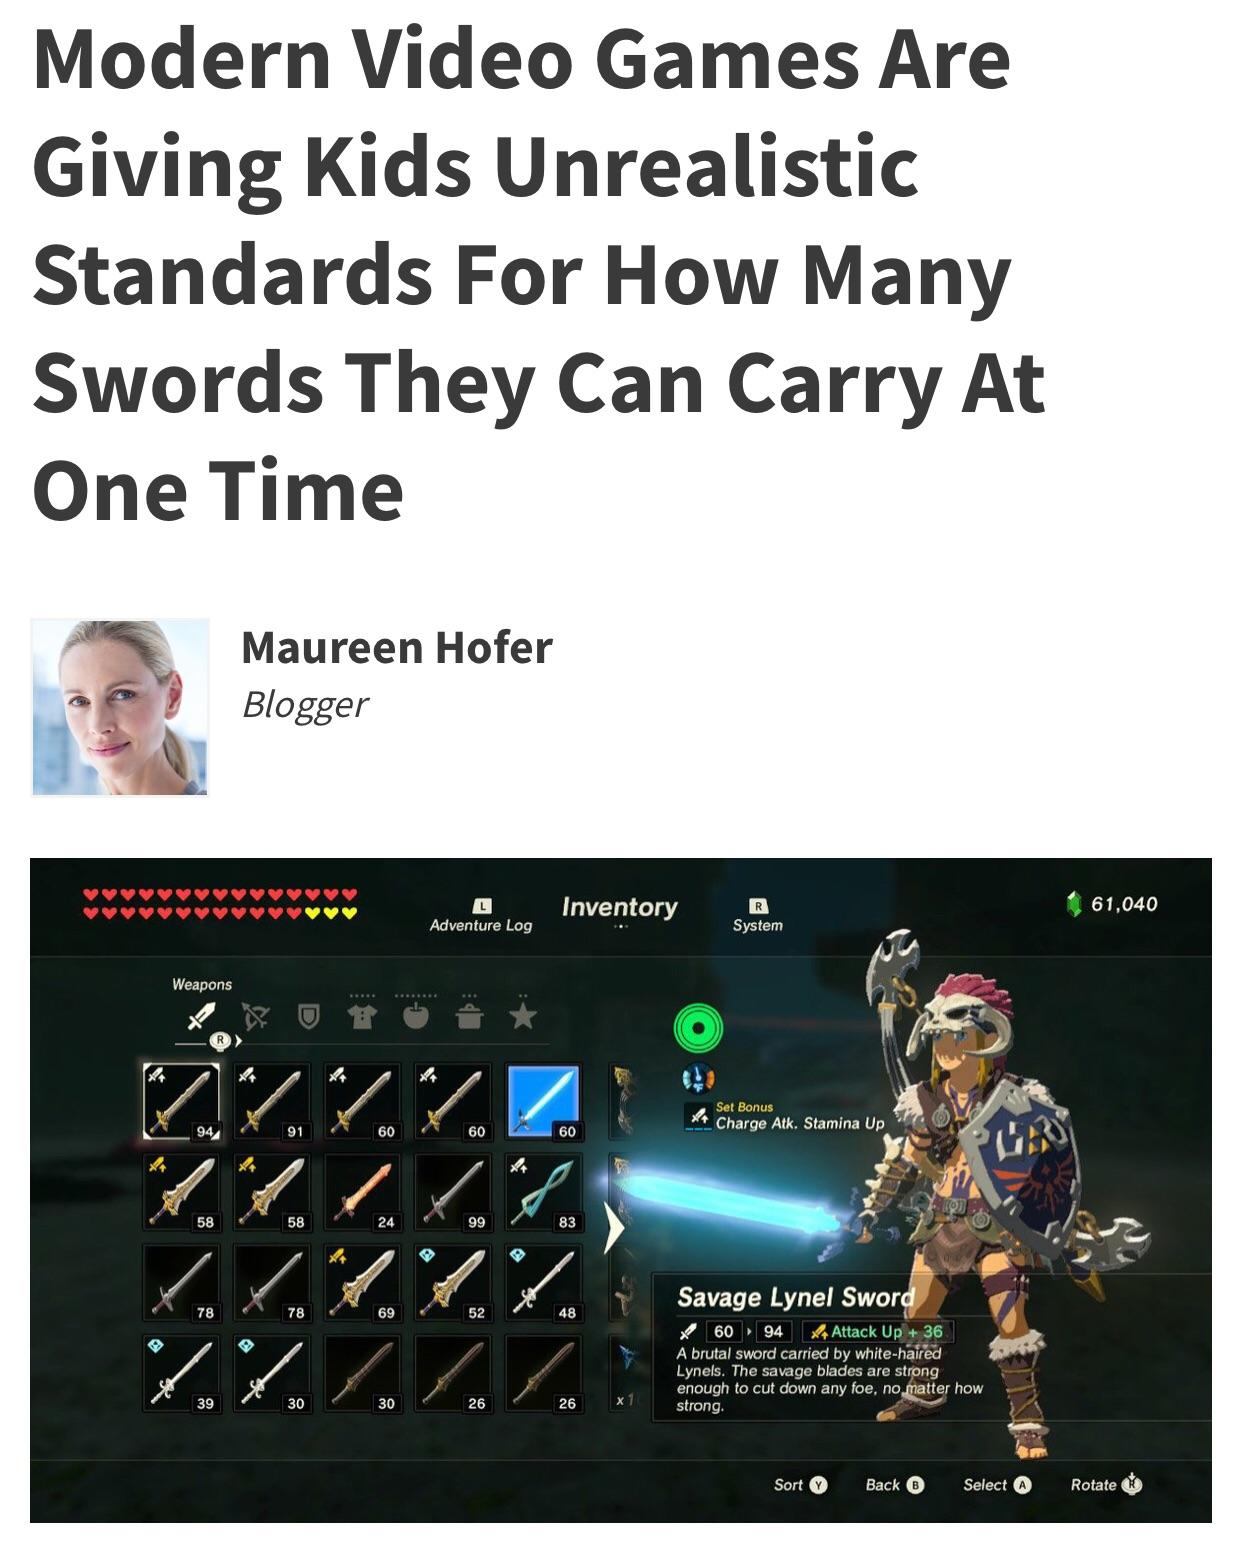 unrealistic swords - Modern Video Games Are Giving Kids Unrealistic Standards For How Many Swords They Can Carry At One Time Maureen Hofer Blogger Vvvvv Inventory R 61,040 Adventure Log System Weapons Set Bonus Charge Atk. Stamina Up 94, 60 60 R 58 99 78 